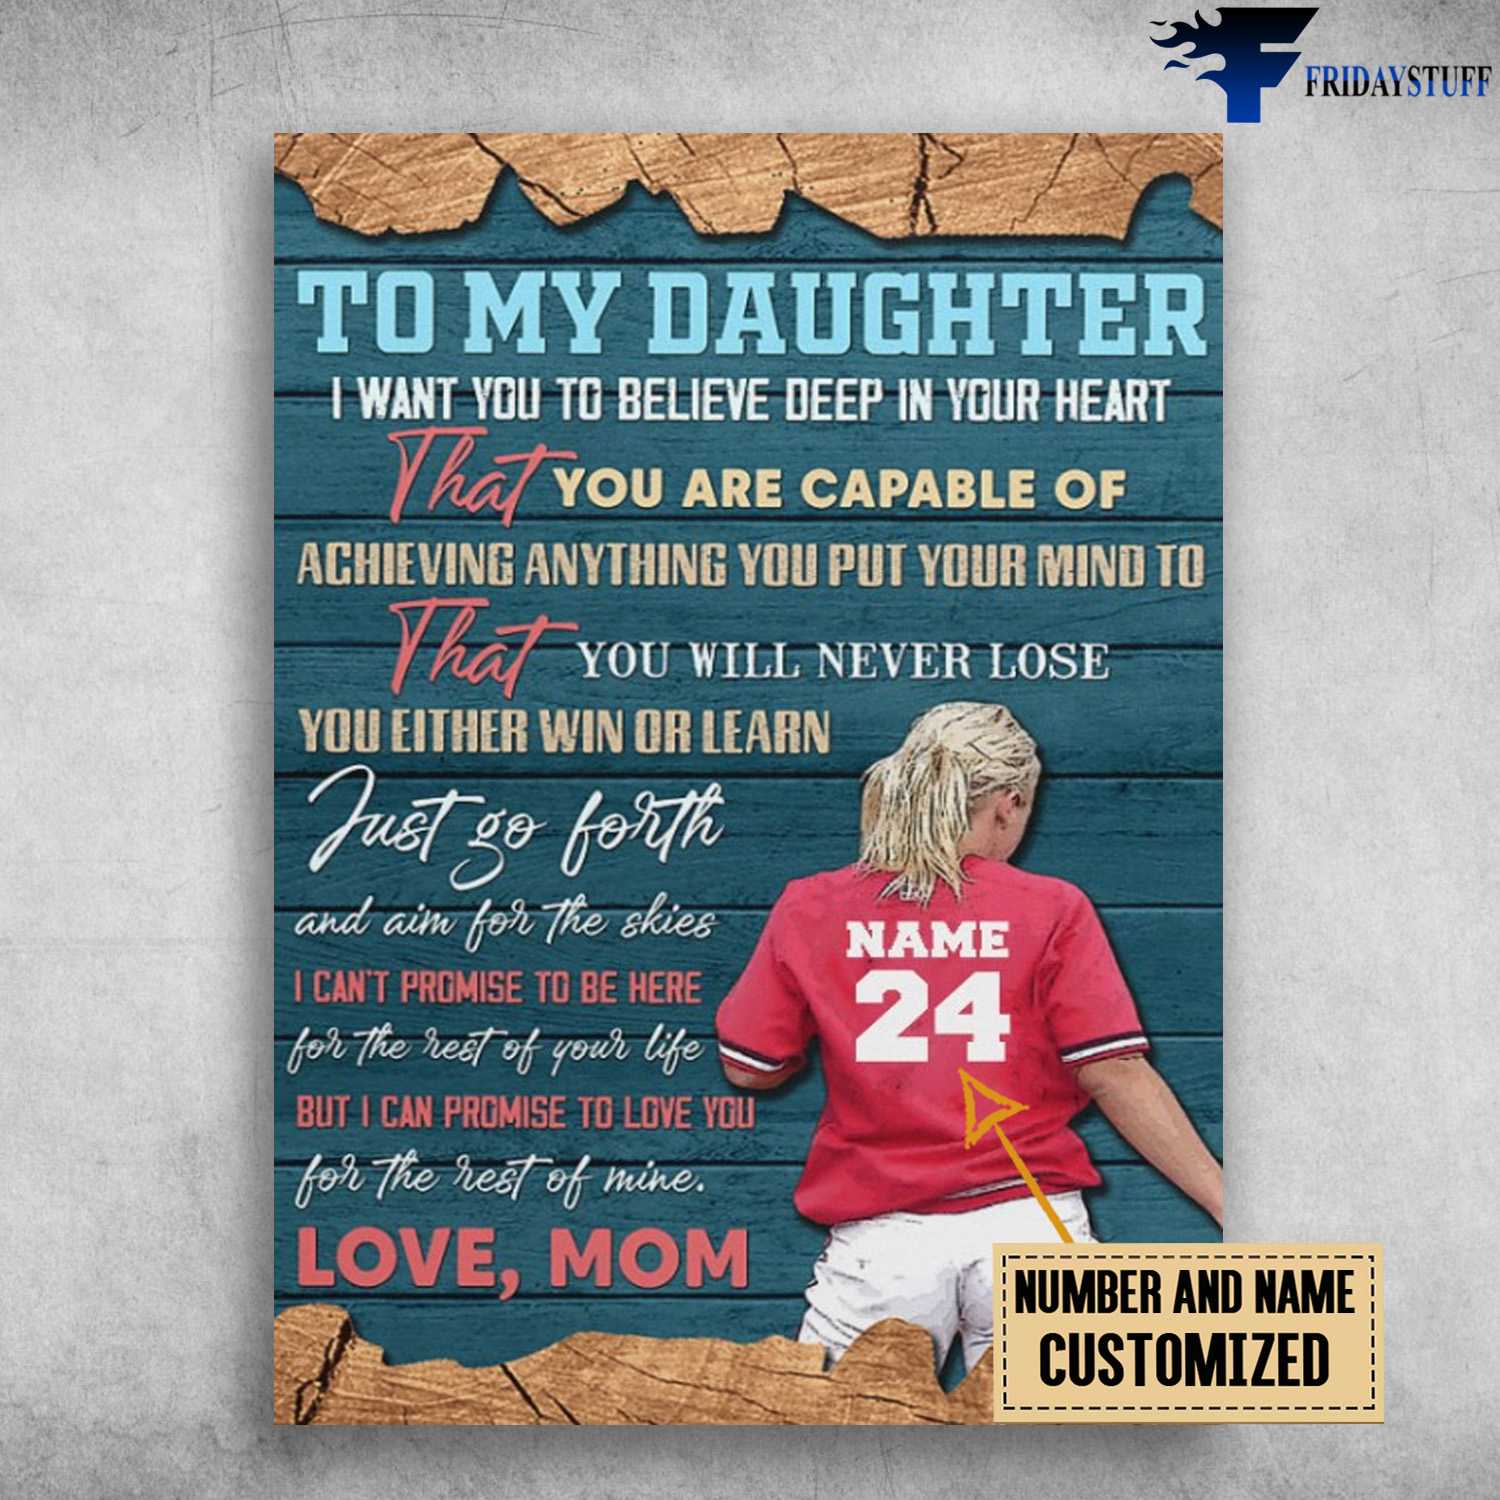 Soccer Lover, Mom And Daughter, To My Daughter, hat You Are Capable Of Achieving Anything, You Put Your Mind, To That You Will Never Lose, You Either Win Or Learn